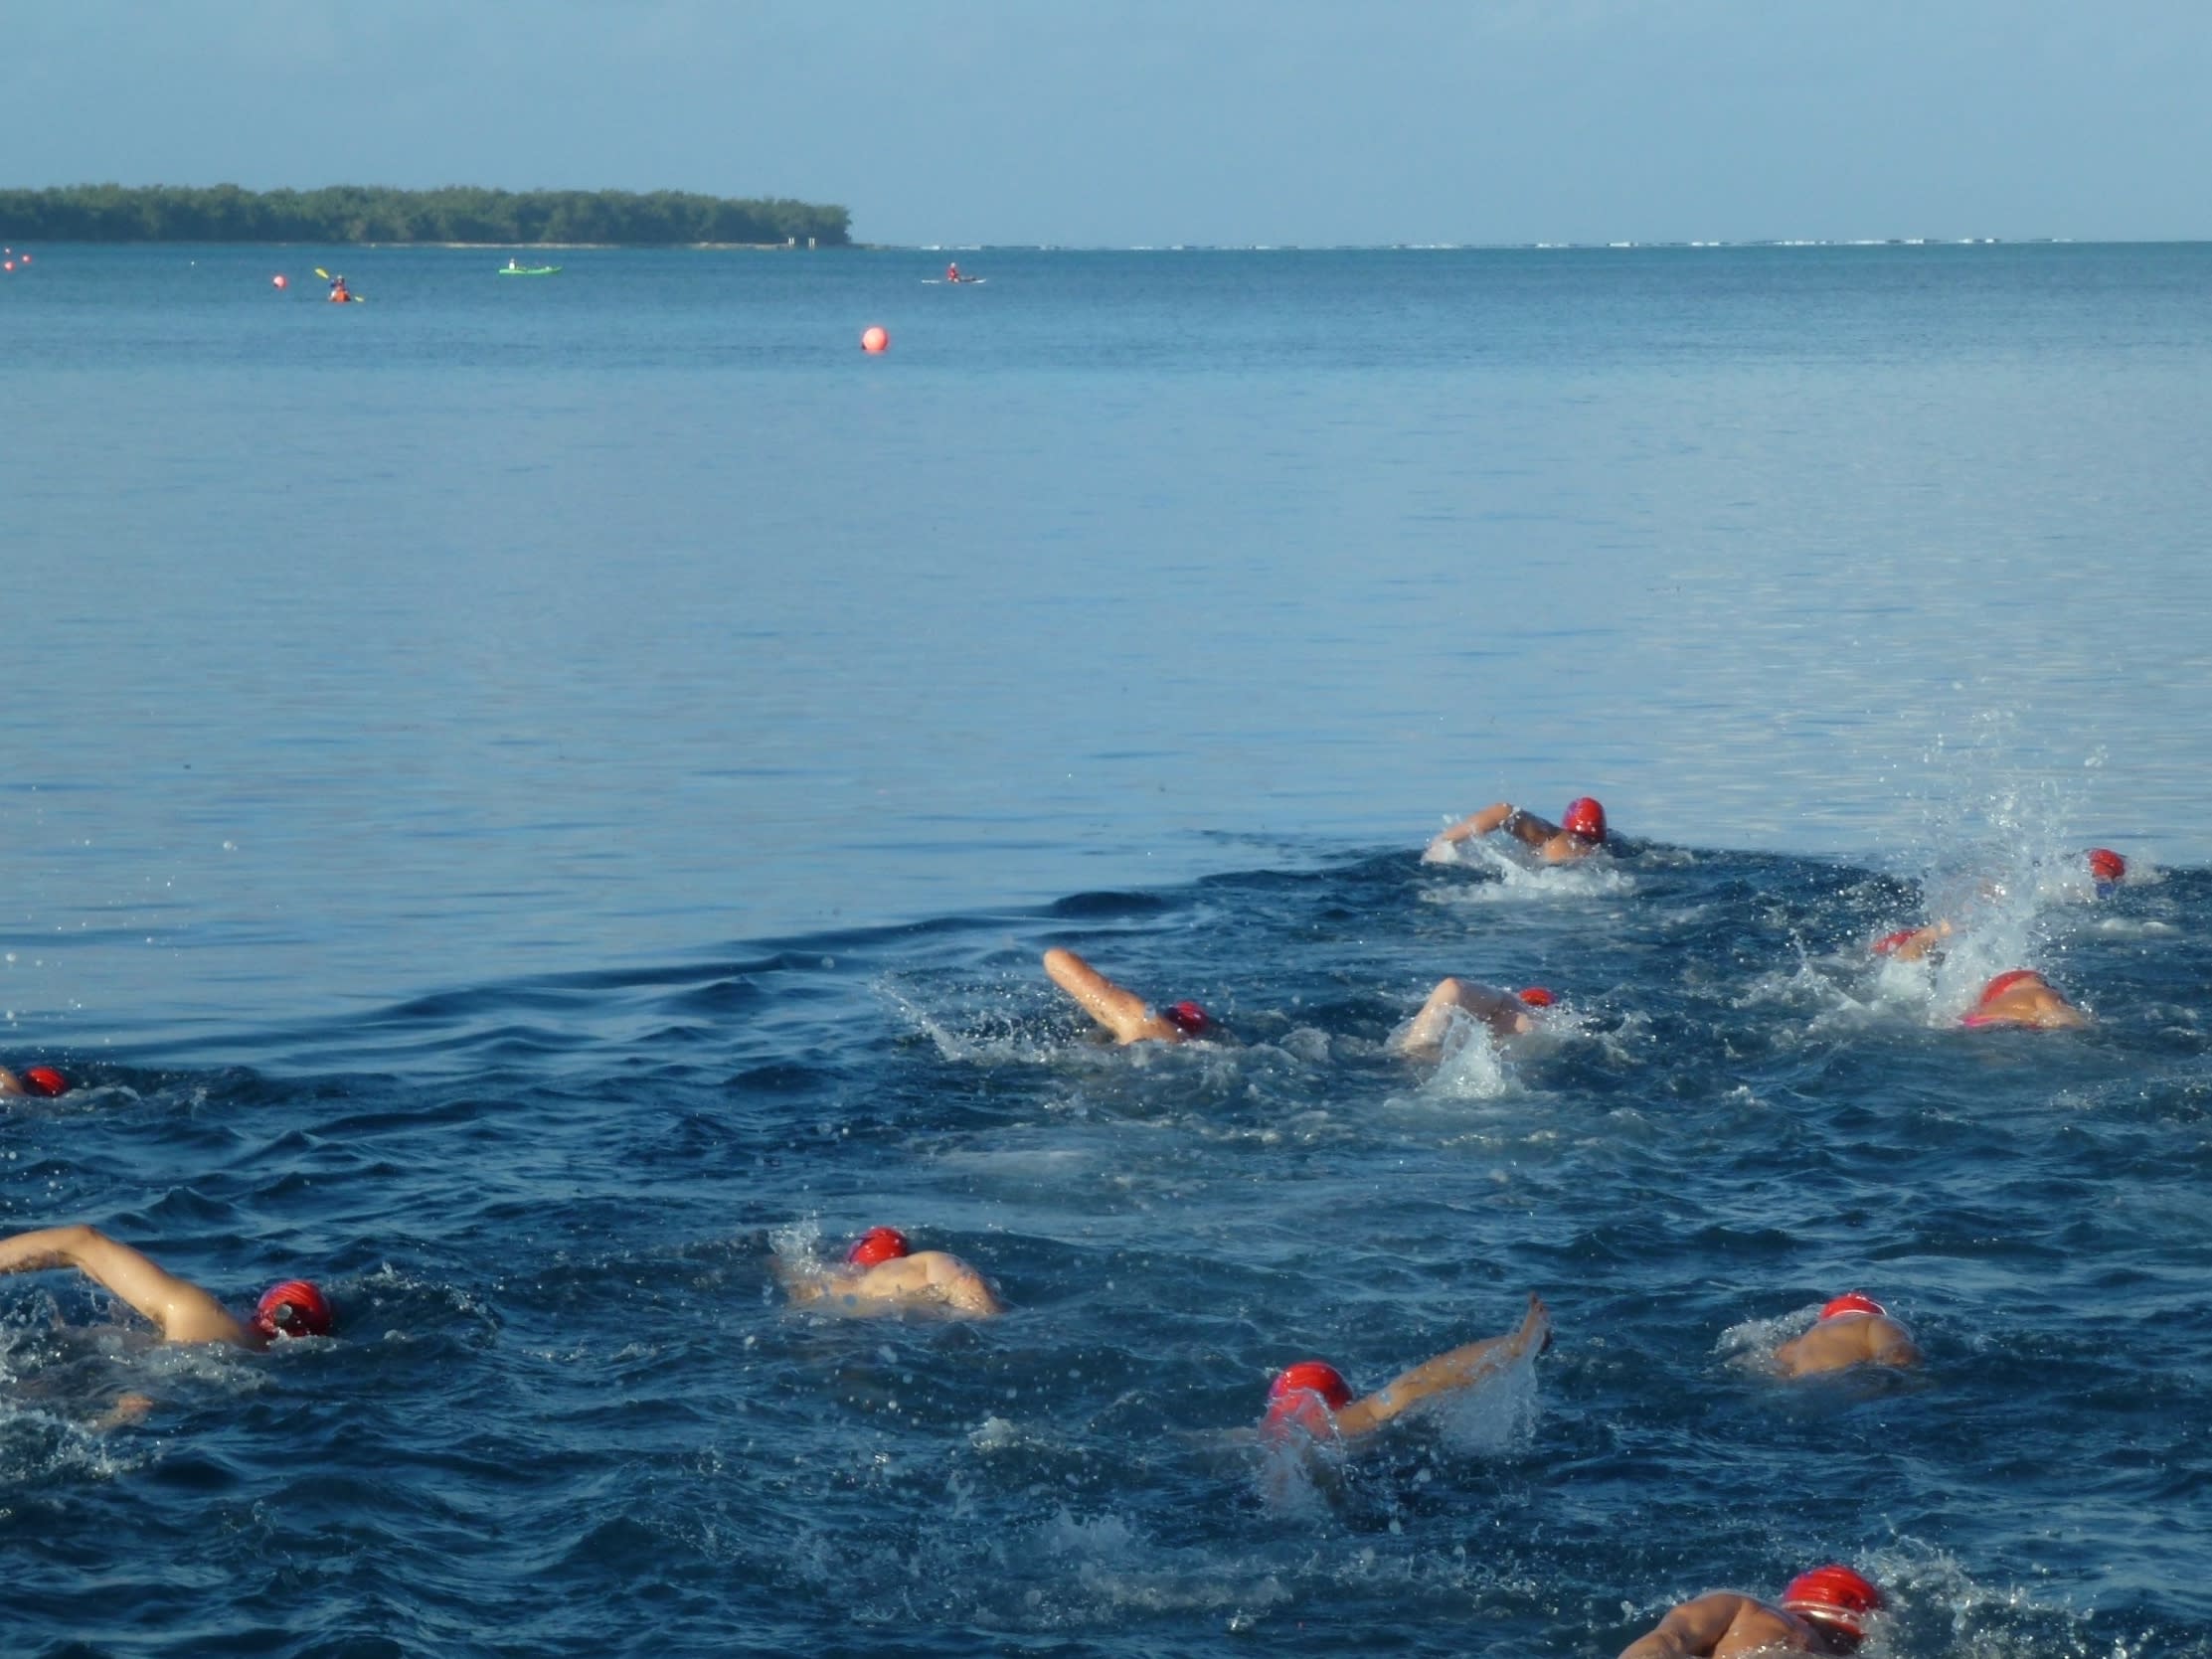 Swimmers on the way to Cocos Island.